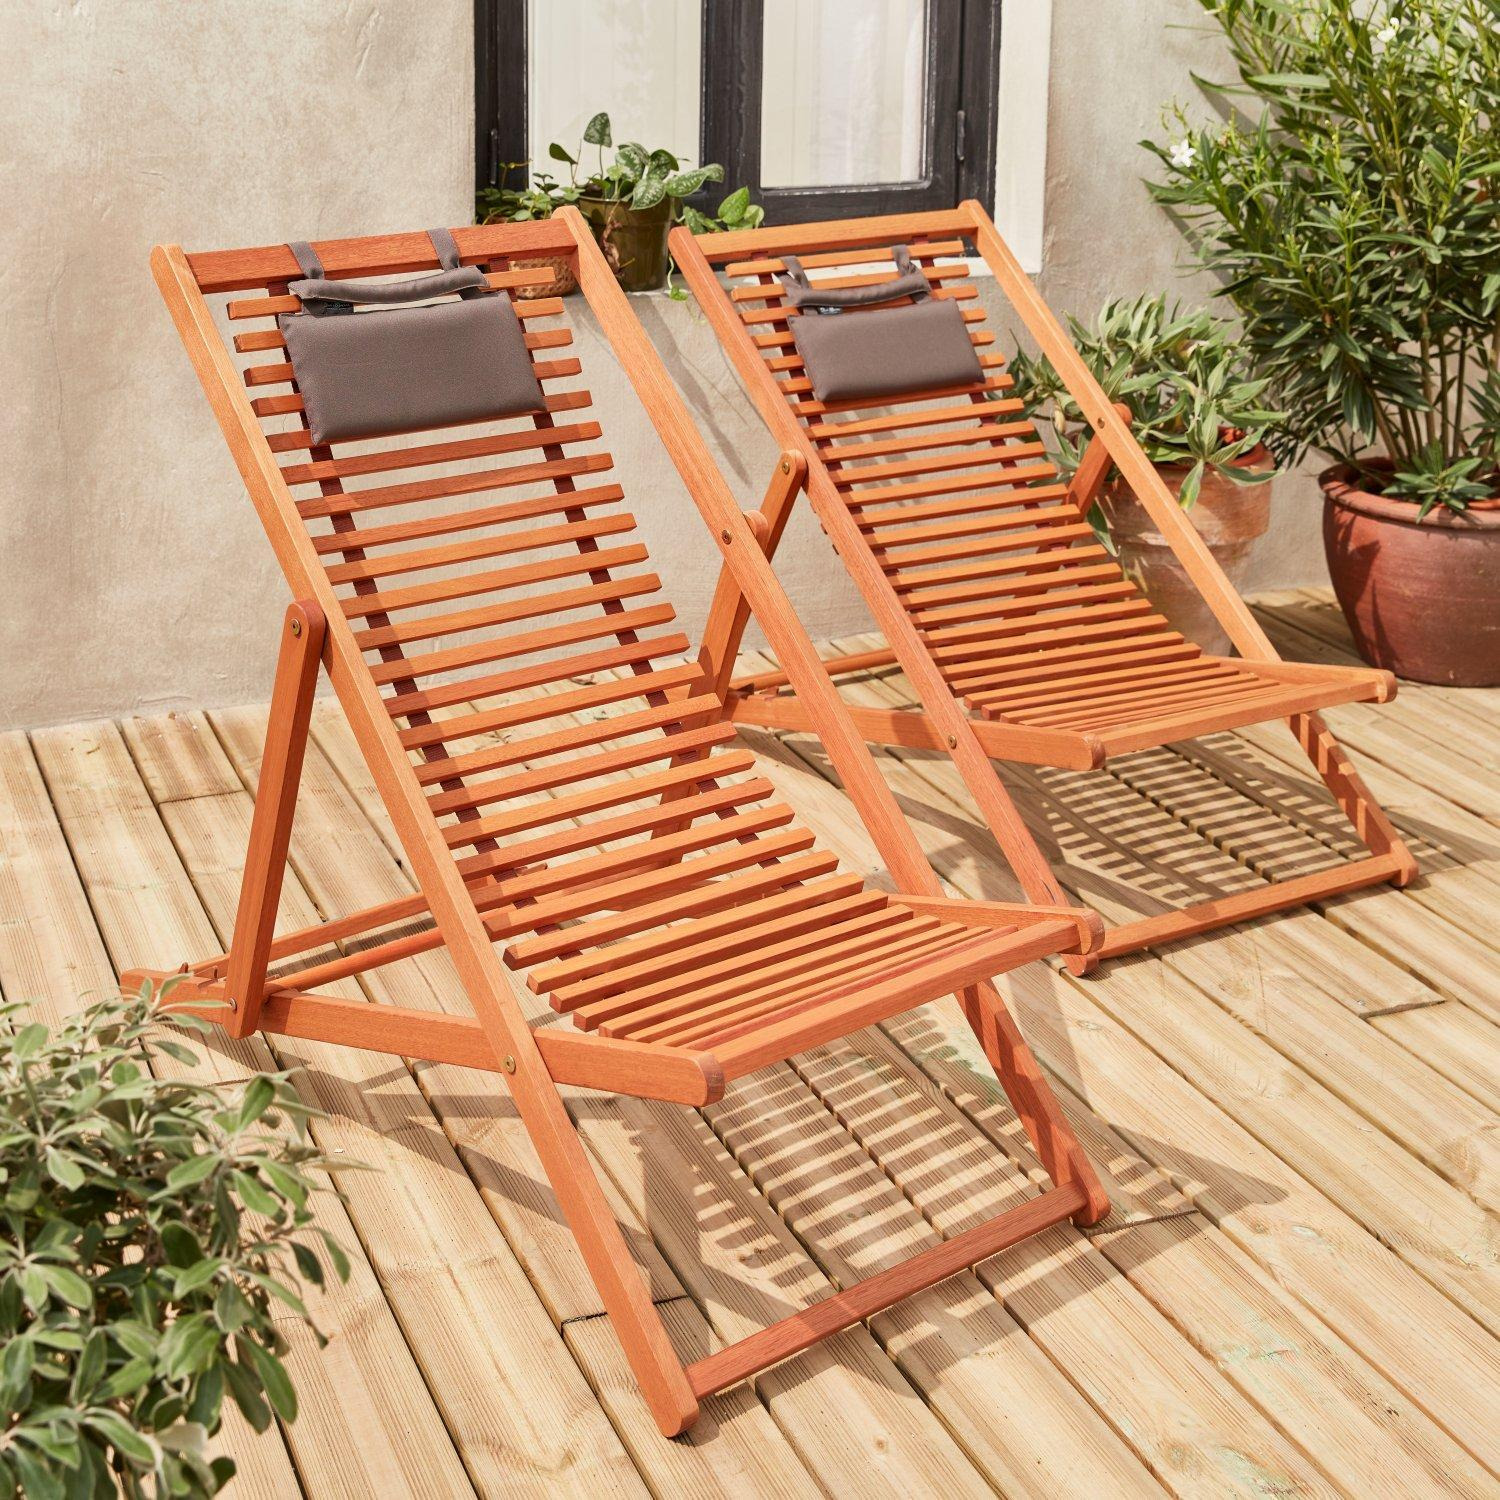 Pair Of Slatted Wood Deck Chairs - image 1